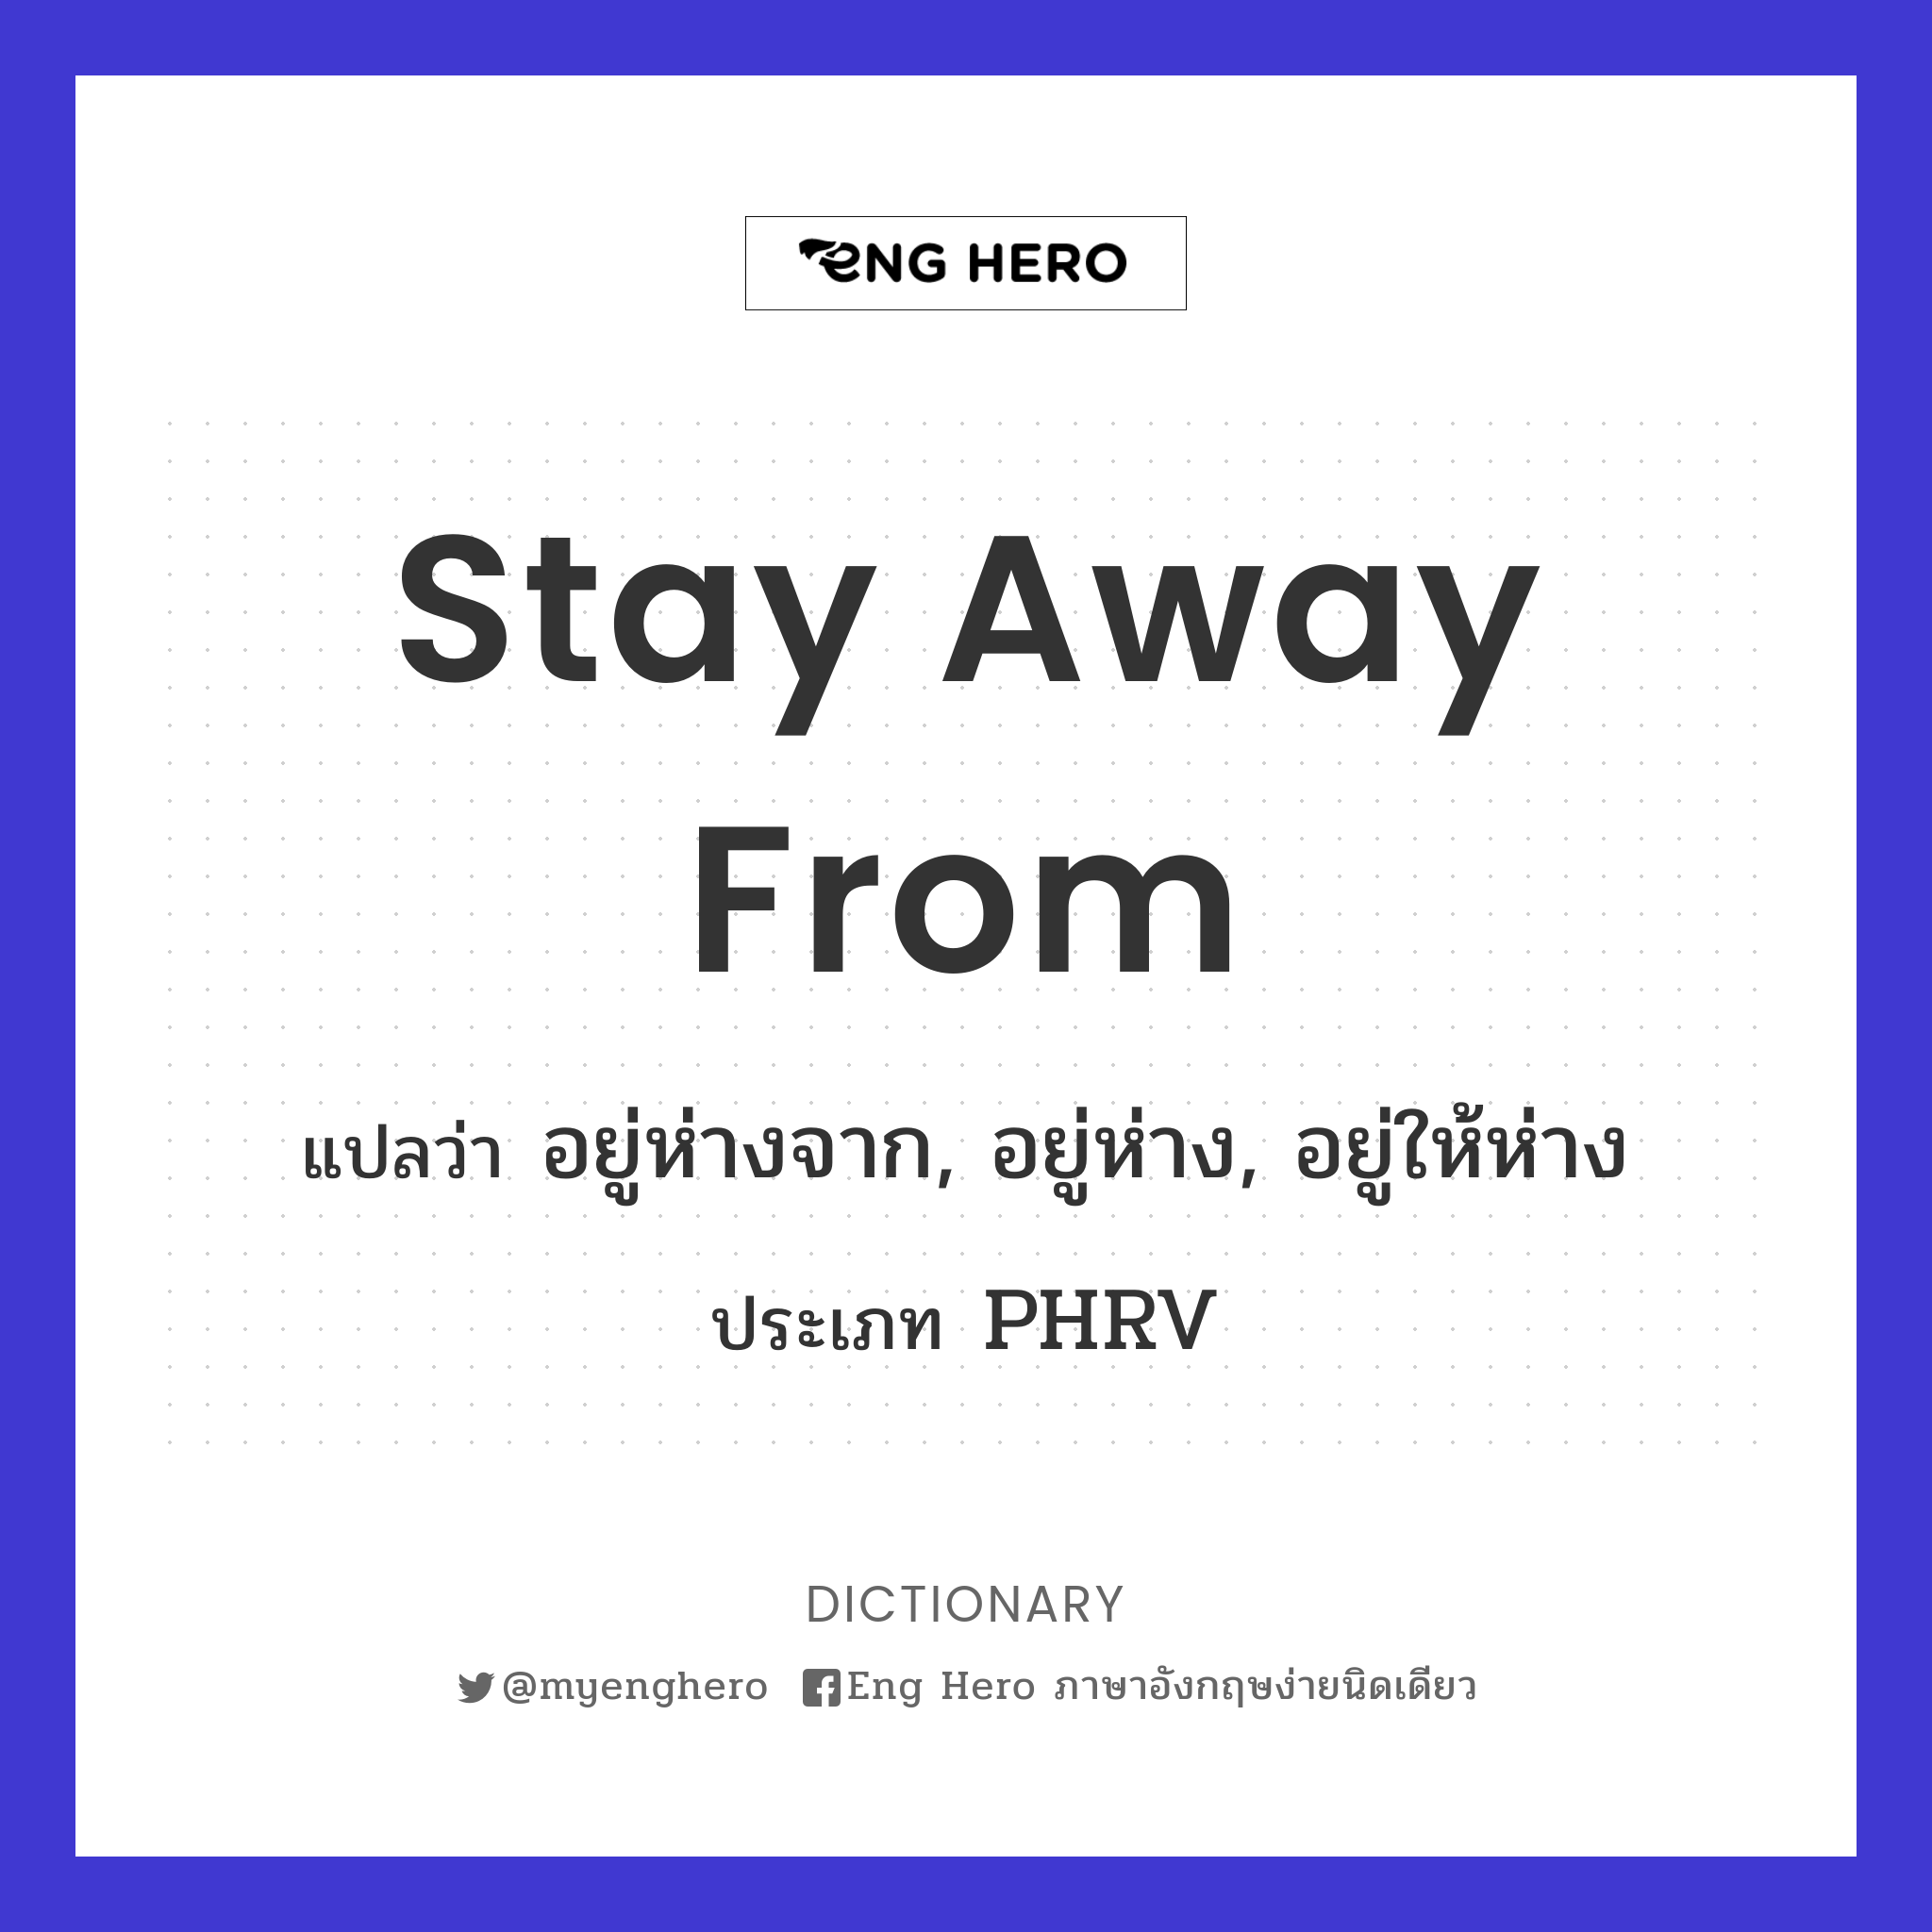 stay away from